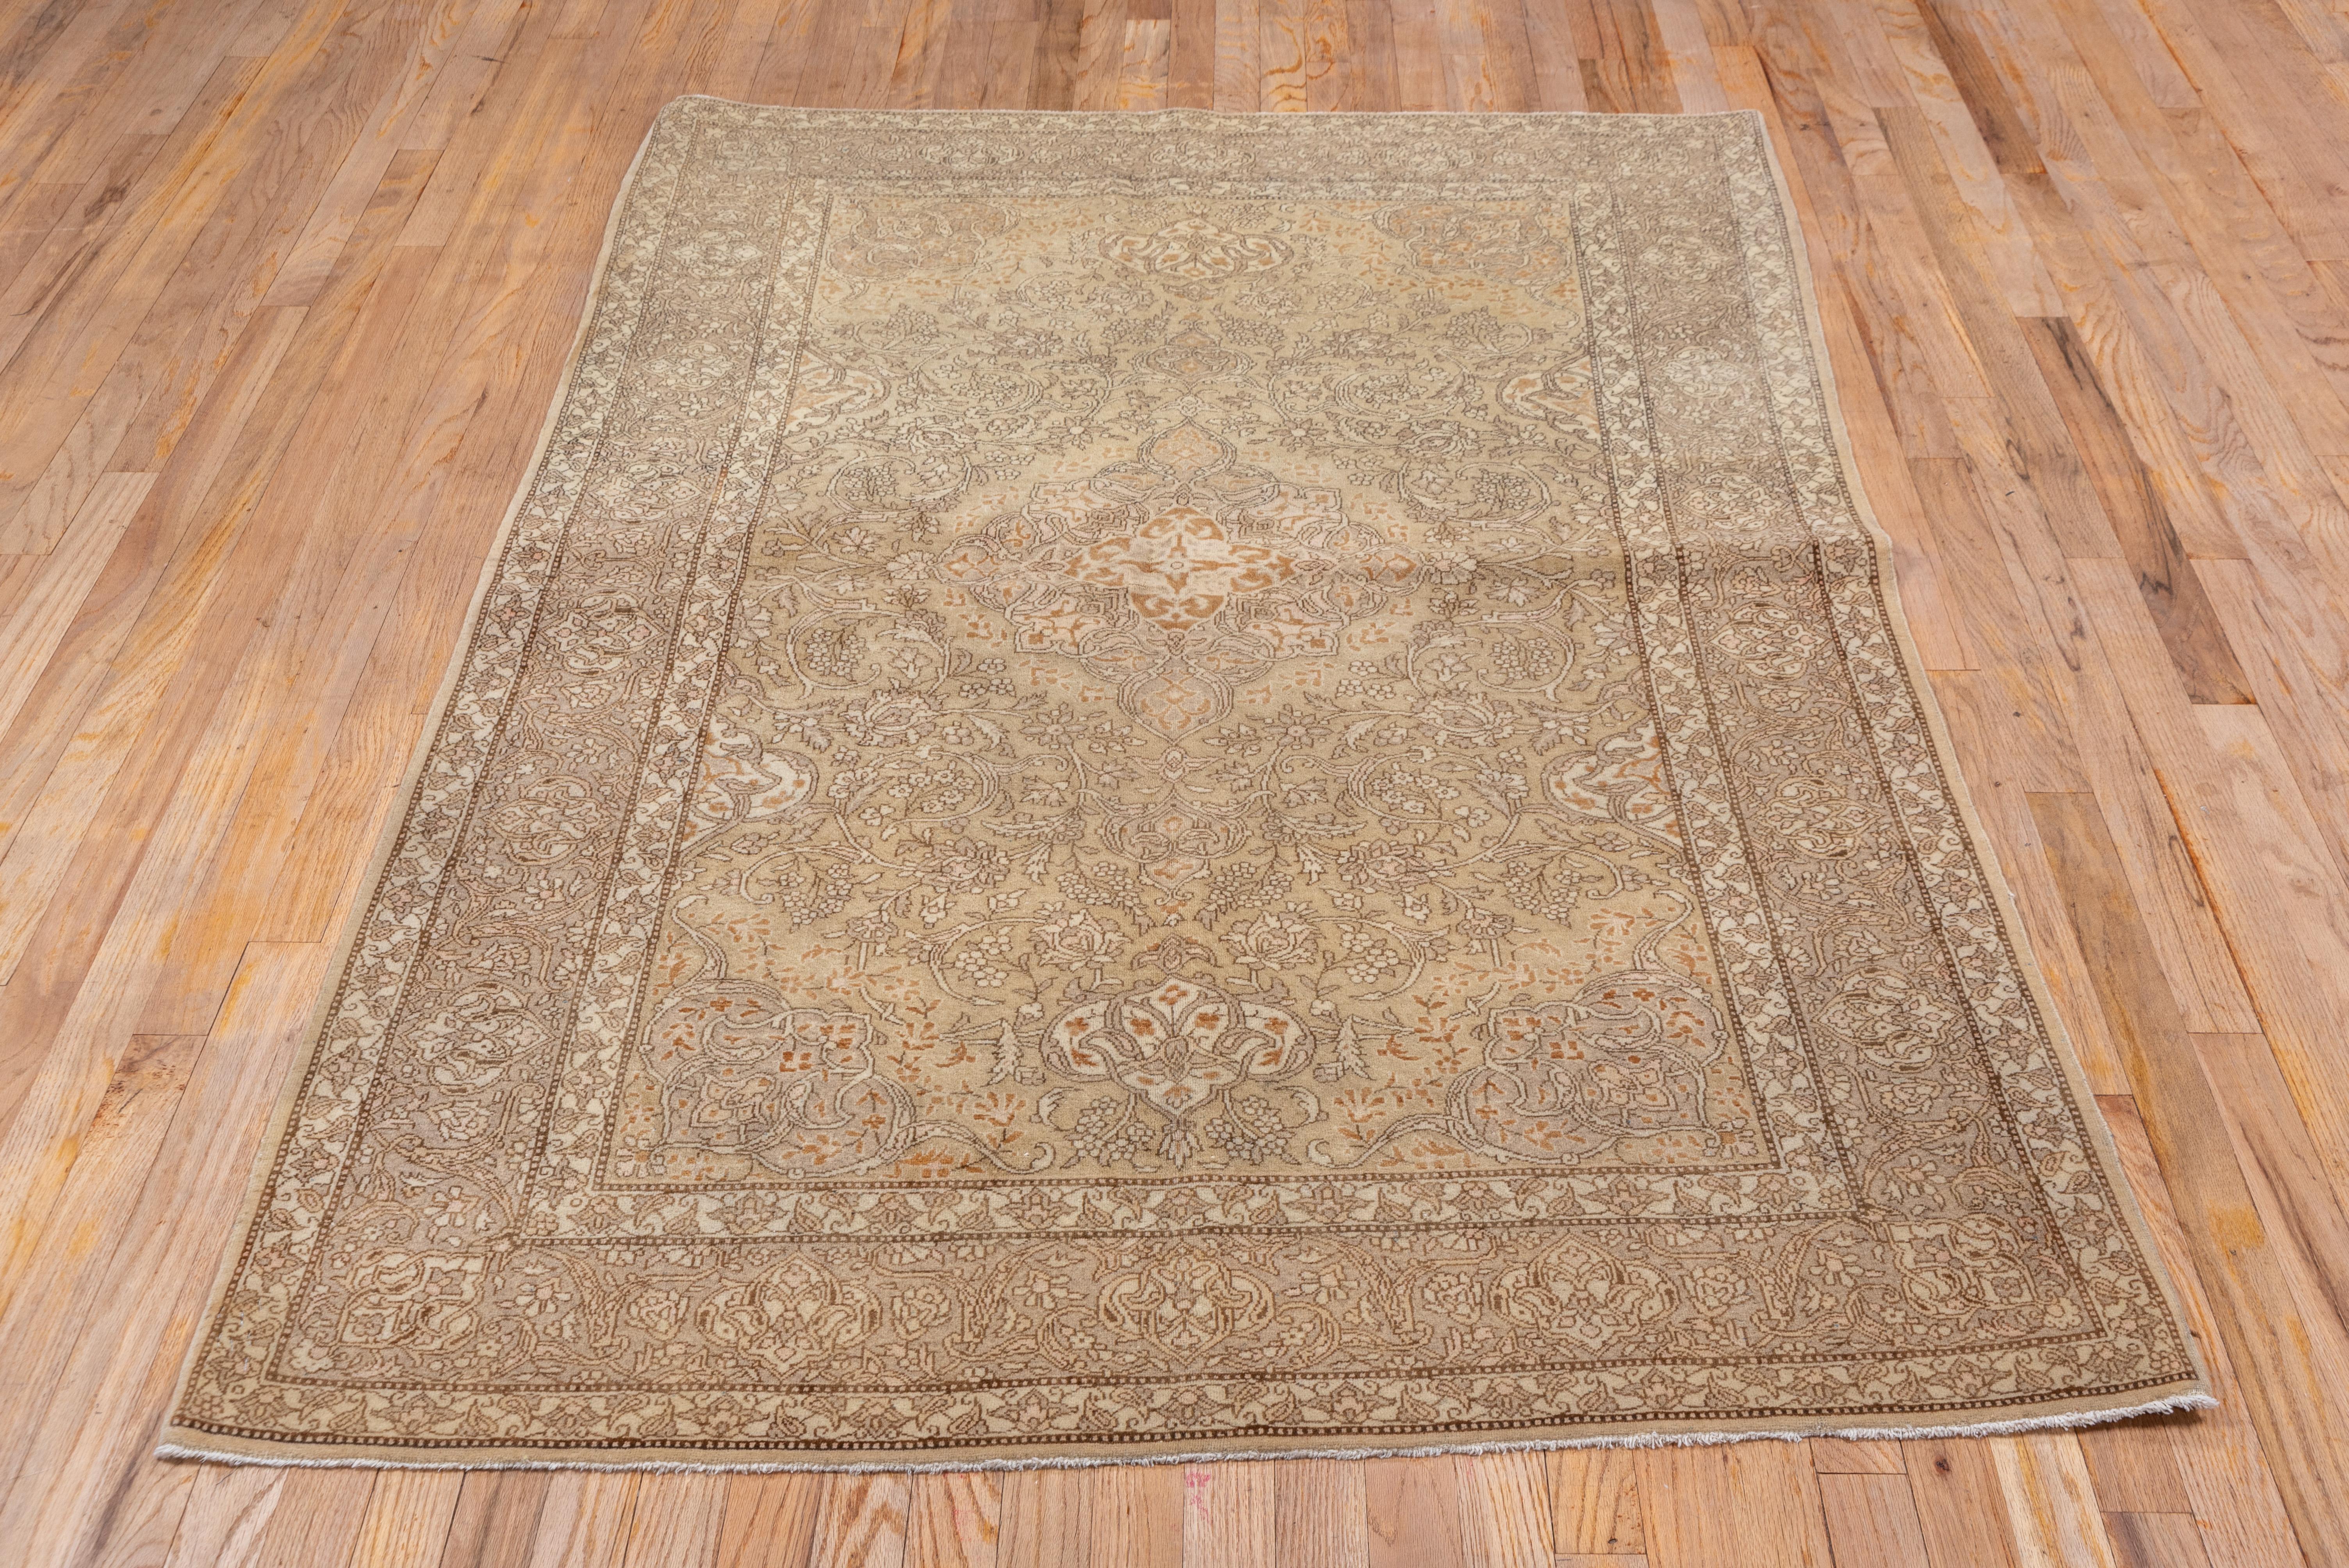 Hand-Knotted Tone on Tone Antique Persian Kashan Scatter Rug, Circa 1940s For Sale